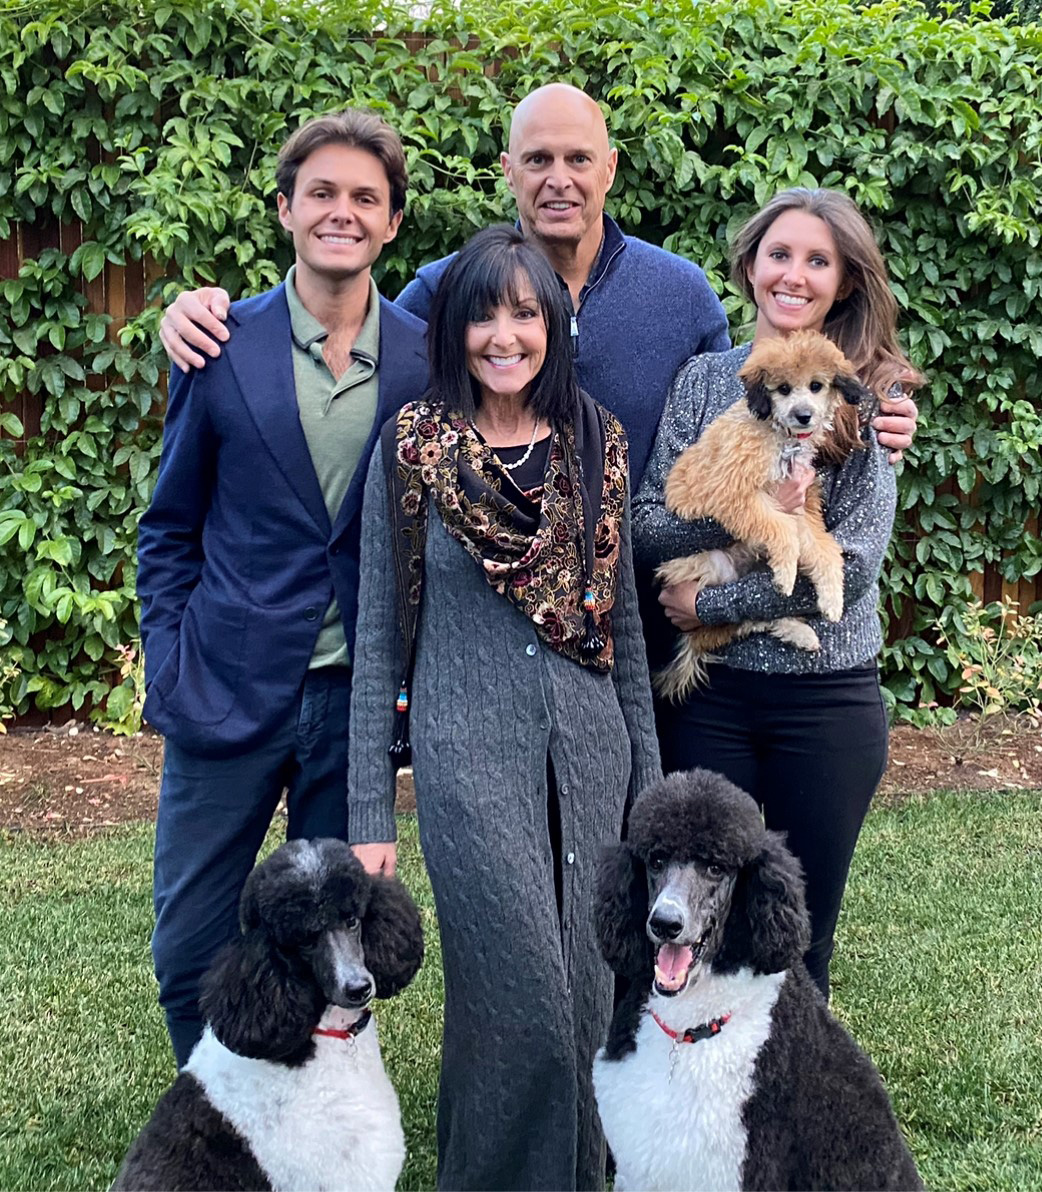 Chase, Janice, Timur and Natalie Tecimer, and poodles Rupert, Daisy and Charlotte